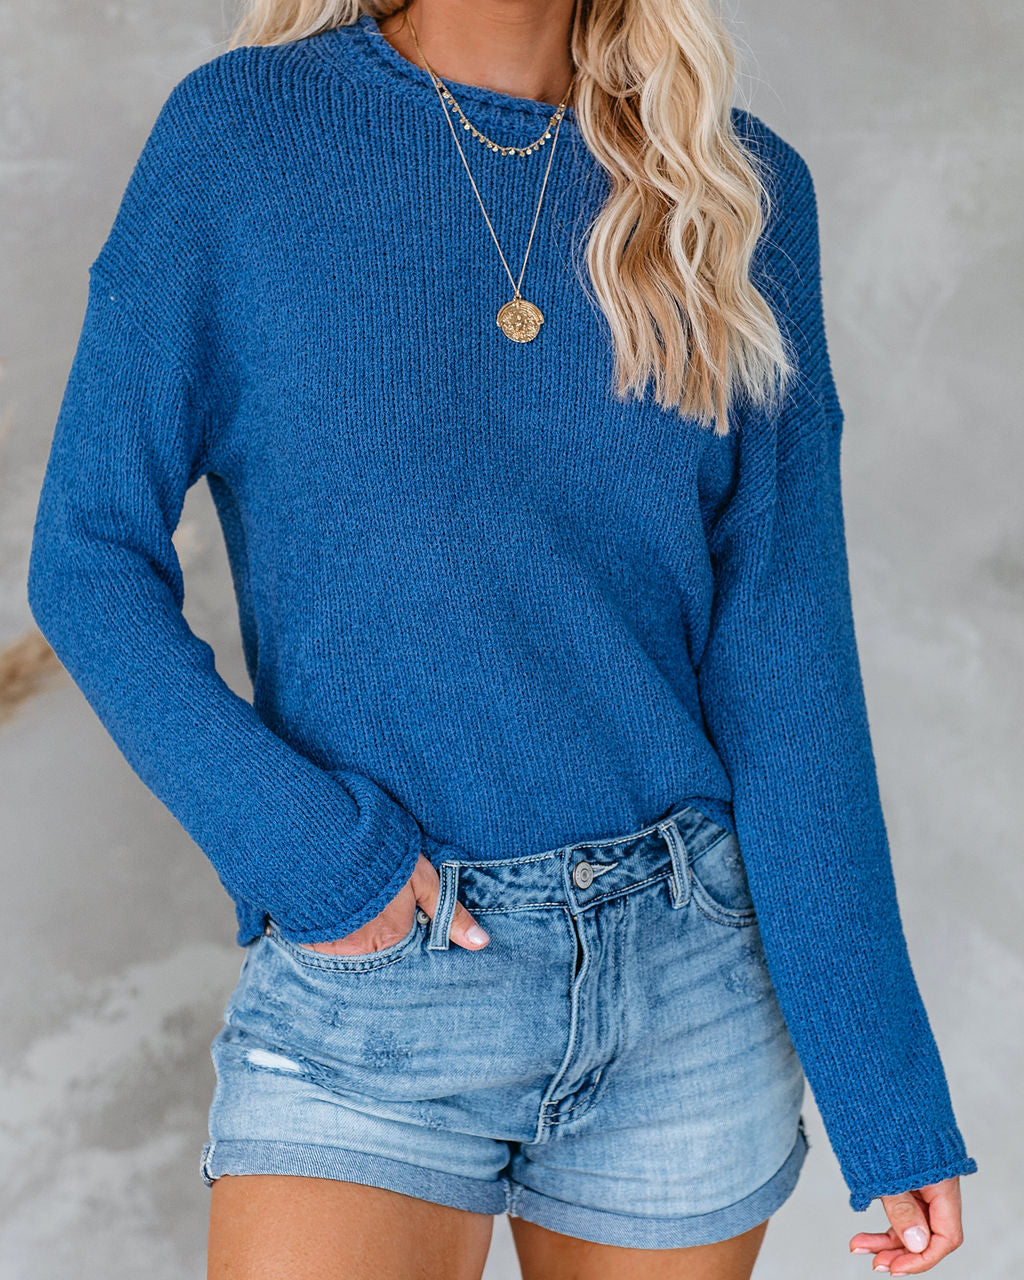 Catch The Ferry Knit Sweater